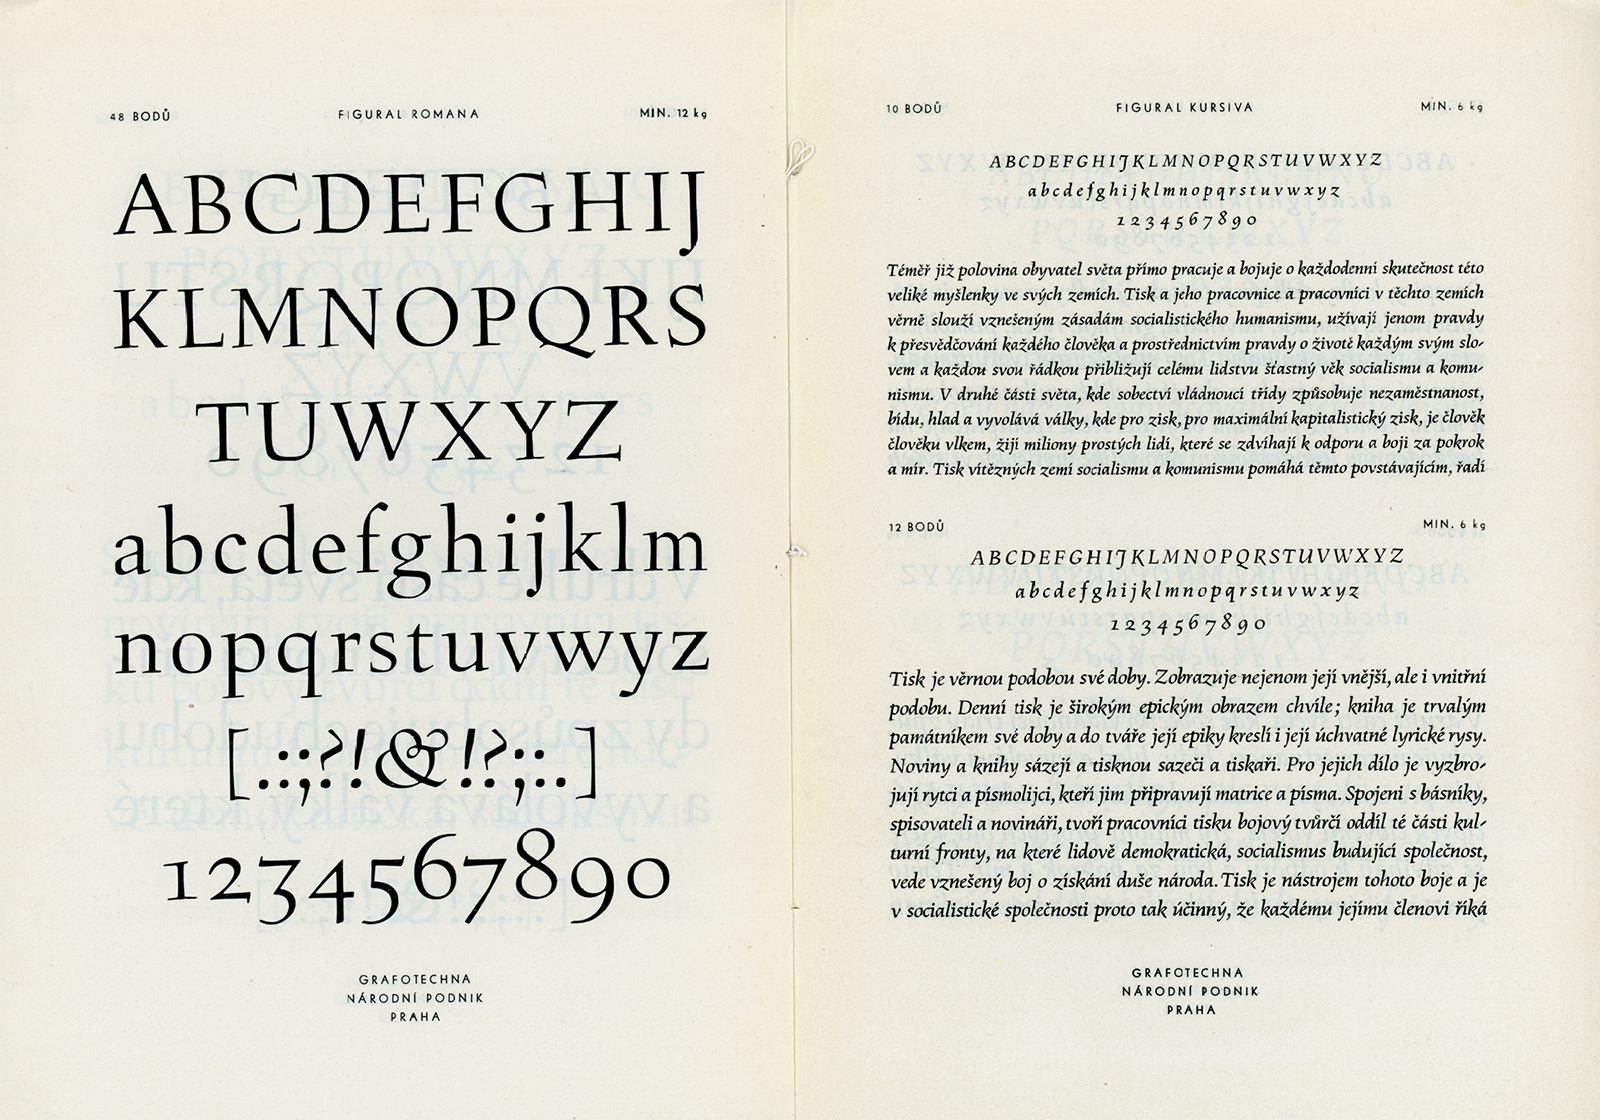 The original specimen of the Figural typeface shows the type in all sizes produced. Published by Grafotechna n. p., 1950s. Source: National Museum Library. [3]